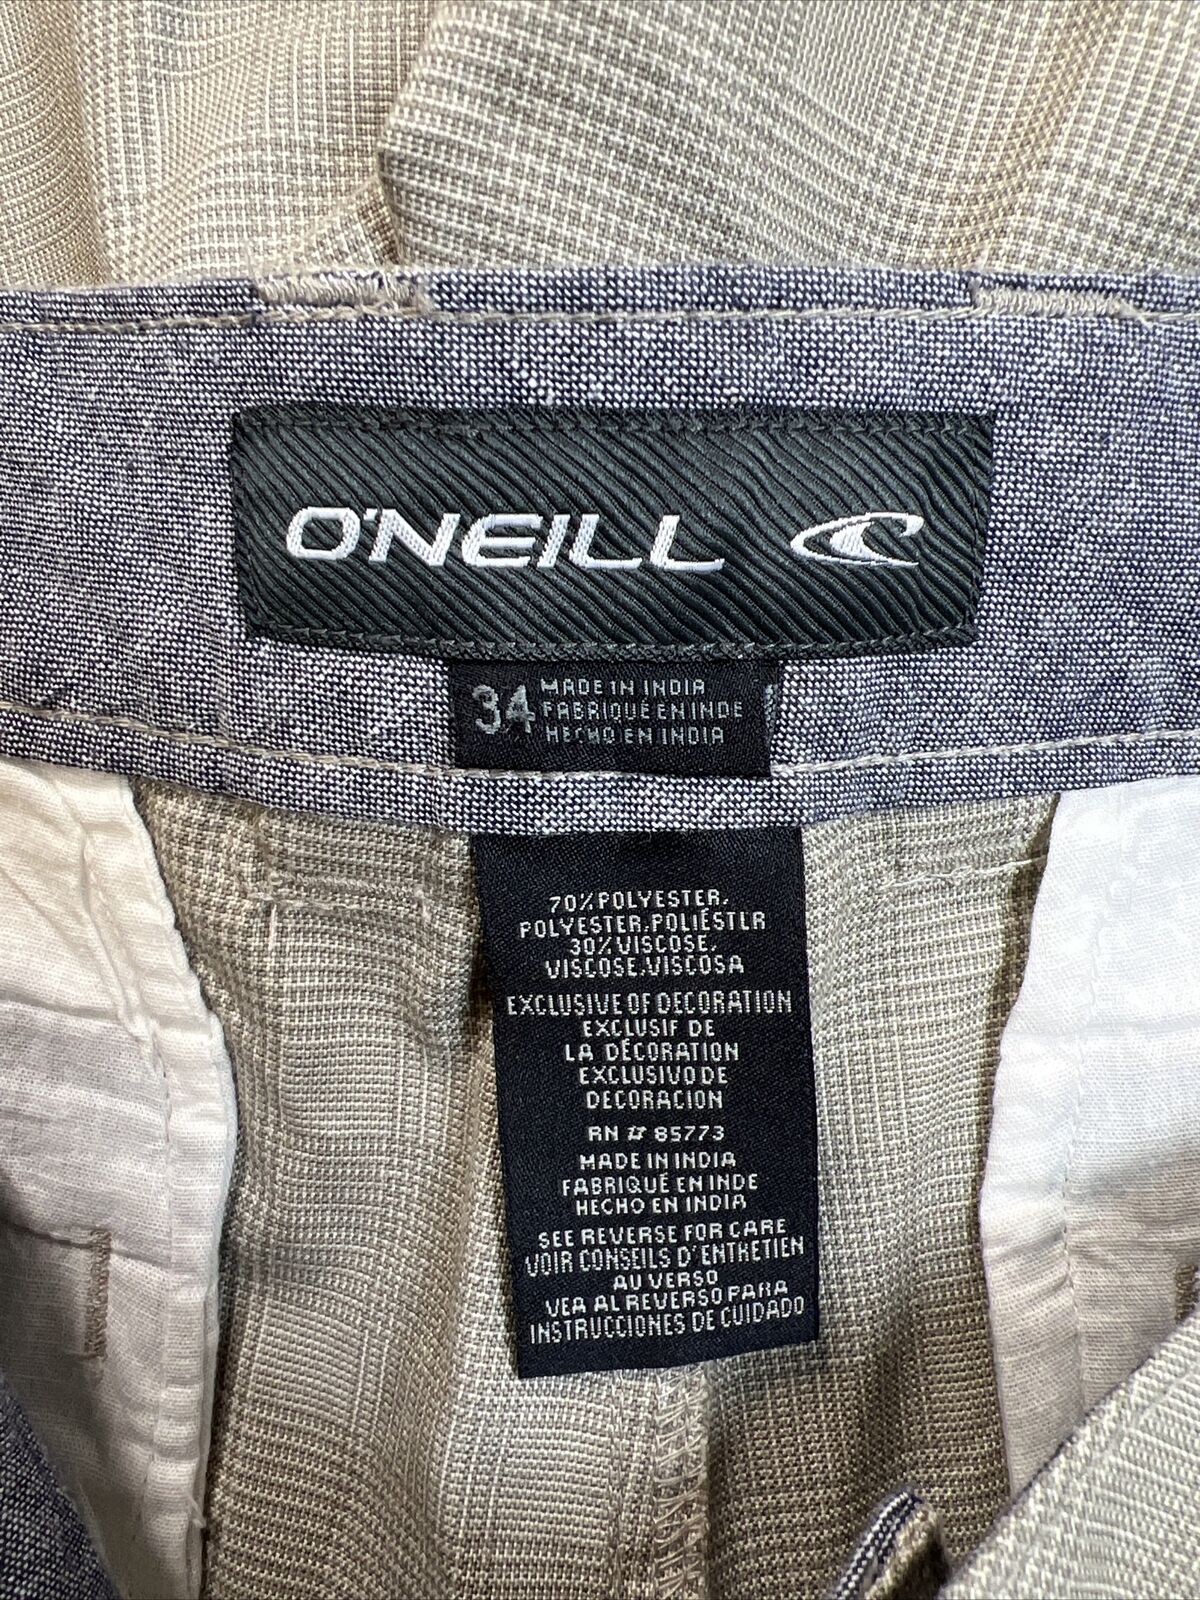 NEW O'Neill Men's Beige Marcos Casual Chinos Shorts - 34